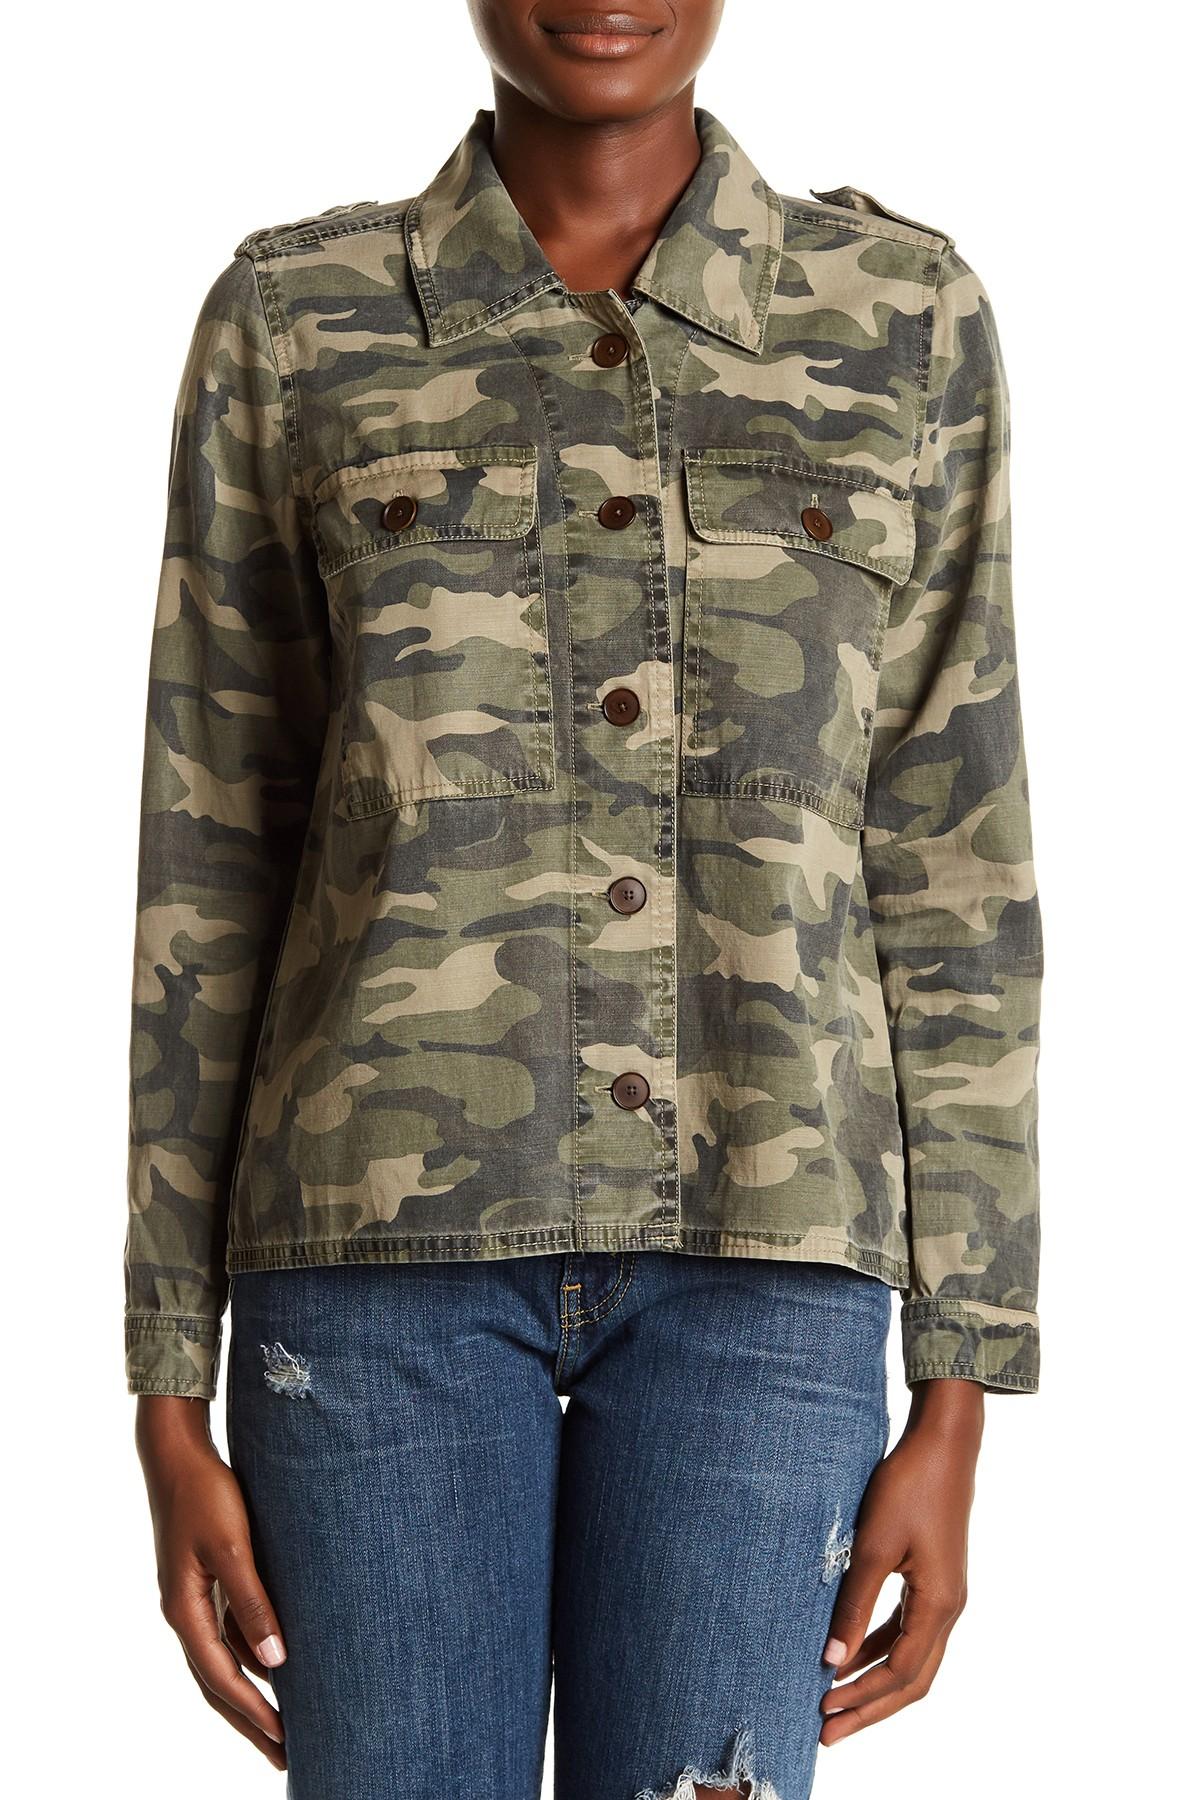 Lucky Brand Cotton Camouflage Shirt Jacket in Camo Olive (Green) - Lyst